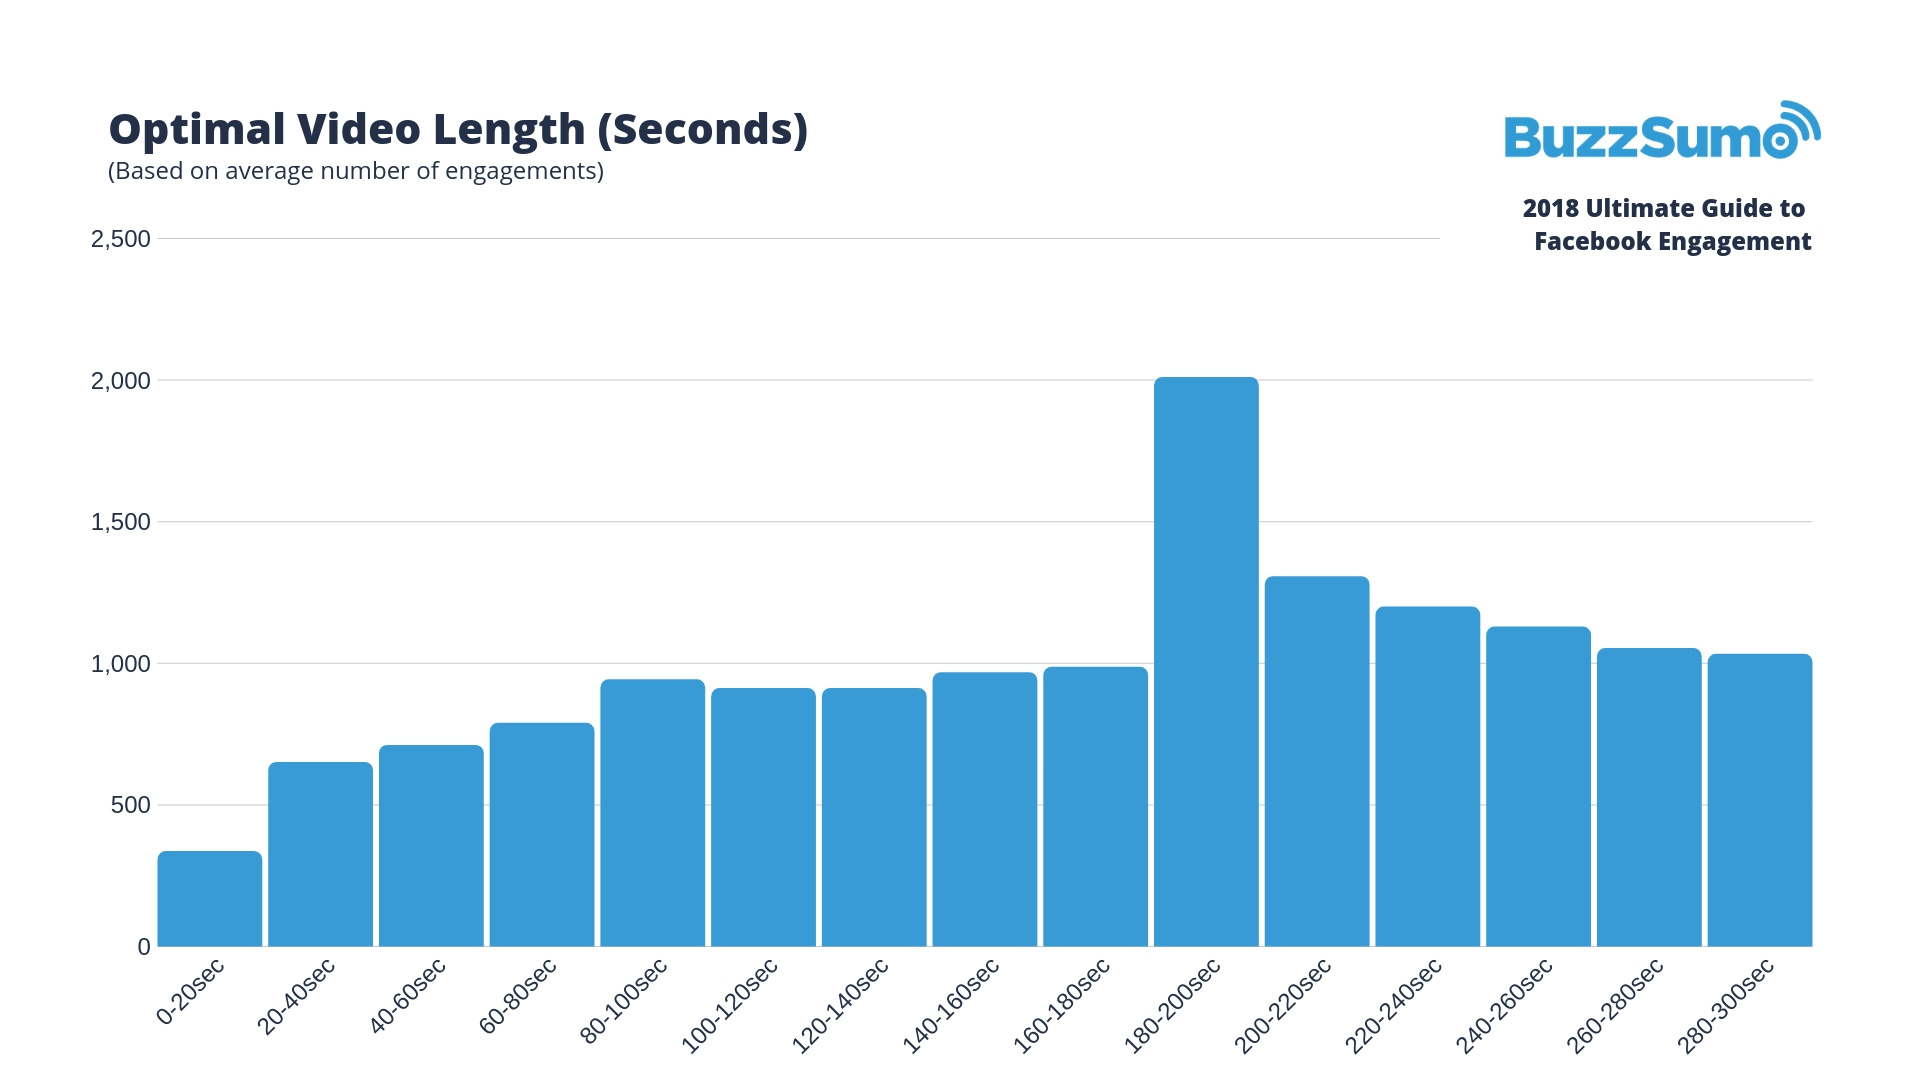 optimal video length in seconds for facebook engagement